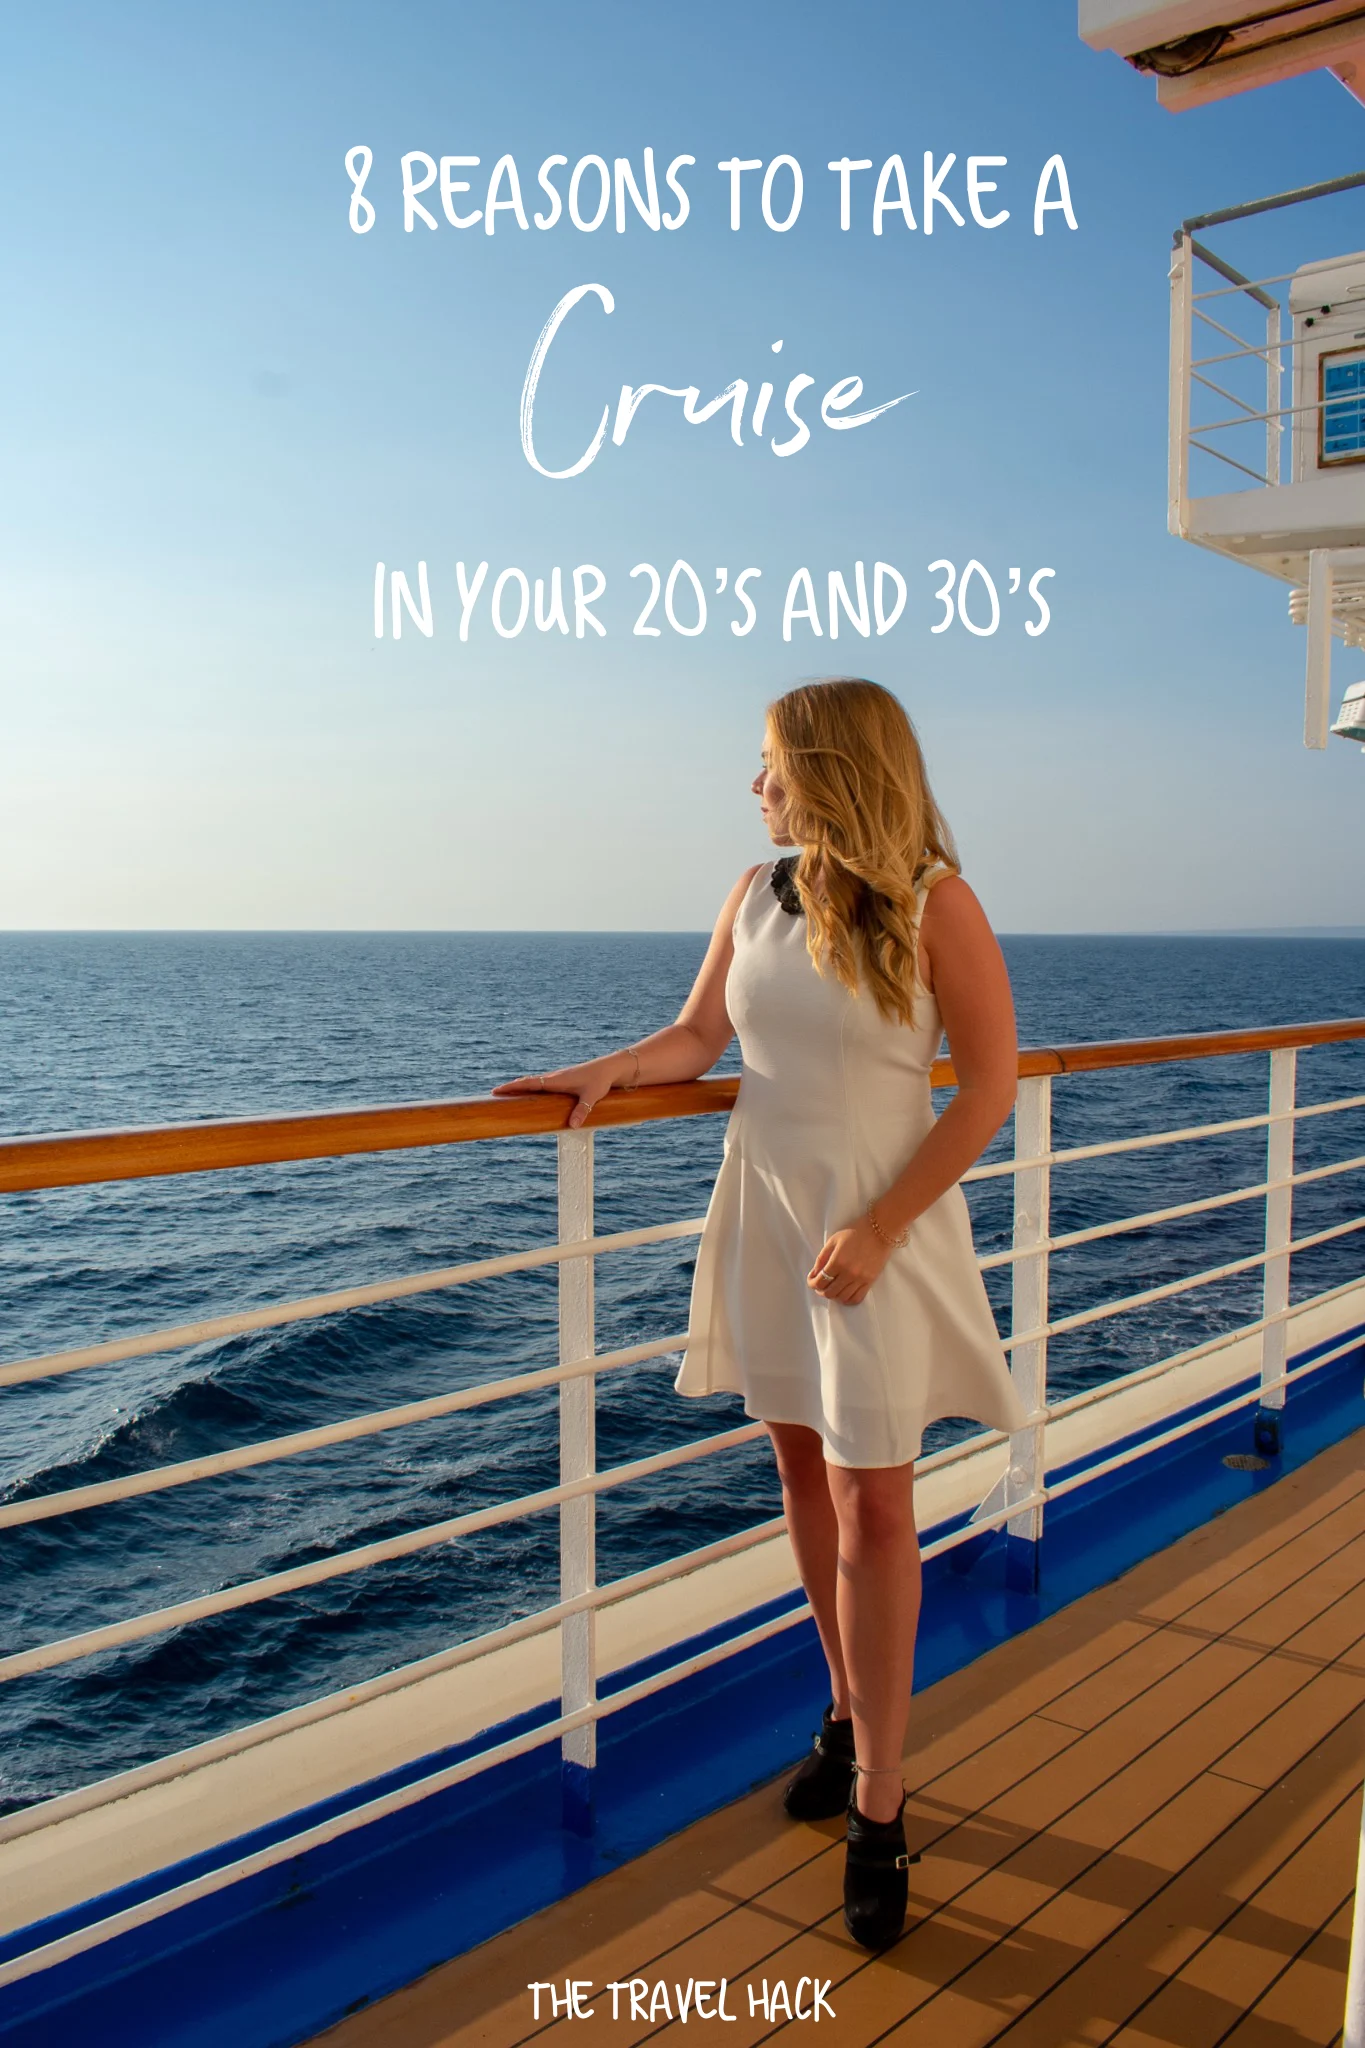 8 reasons why you should take a cruise in your 20's and 30's